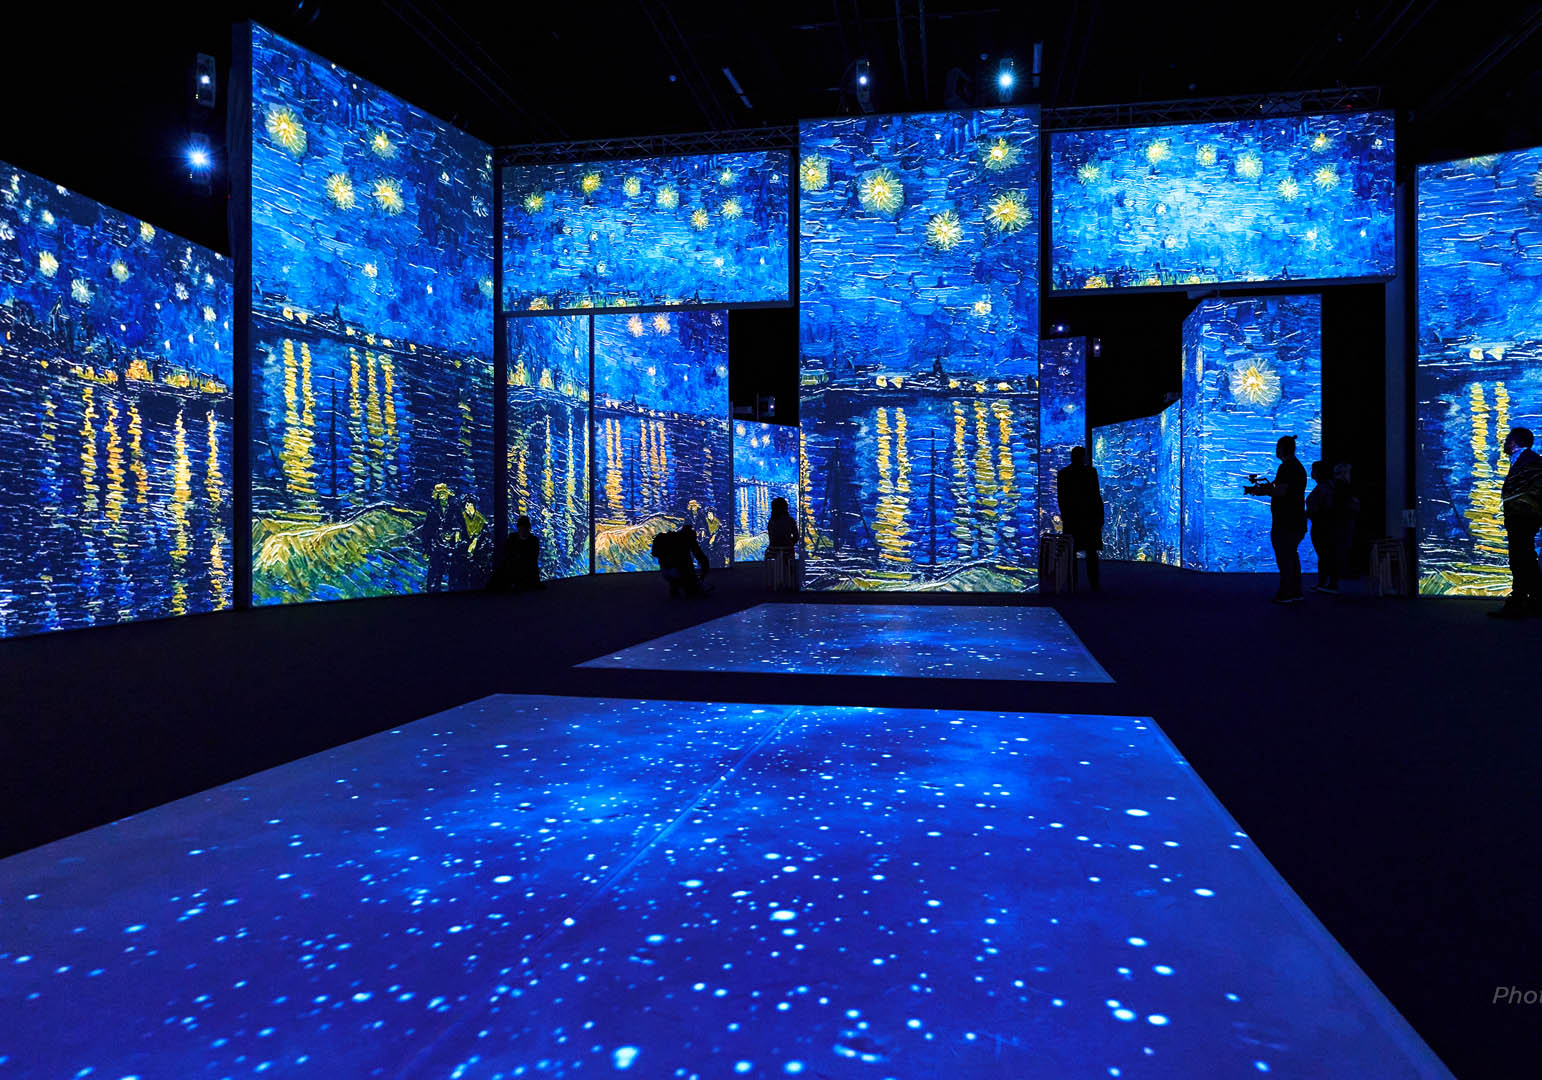 A dark room with multiple projections of Starry Nights by Vincent Van Gogh on the walls and floor. There are blue night skies with swirly stars